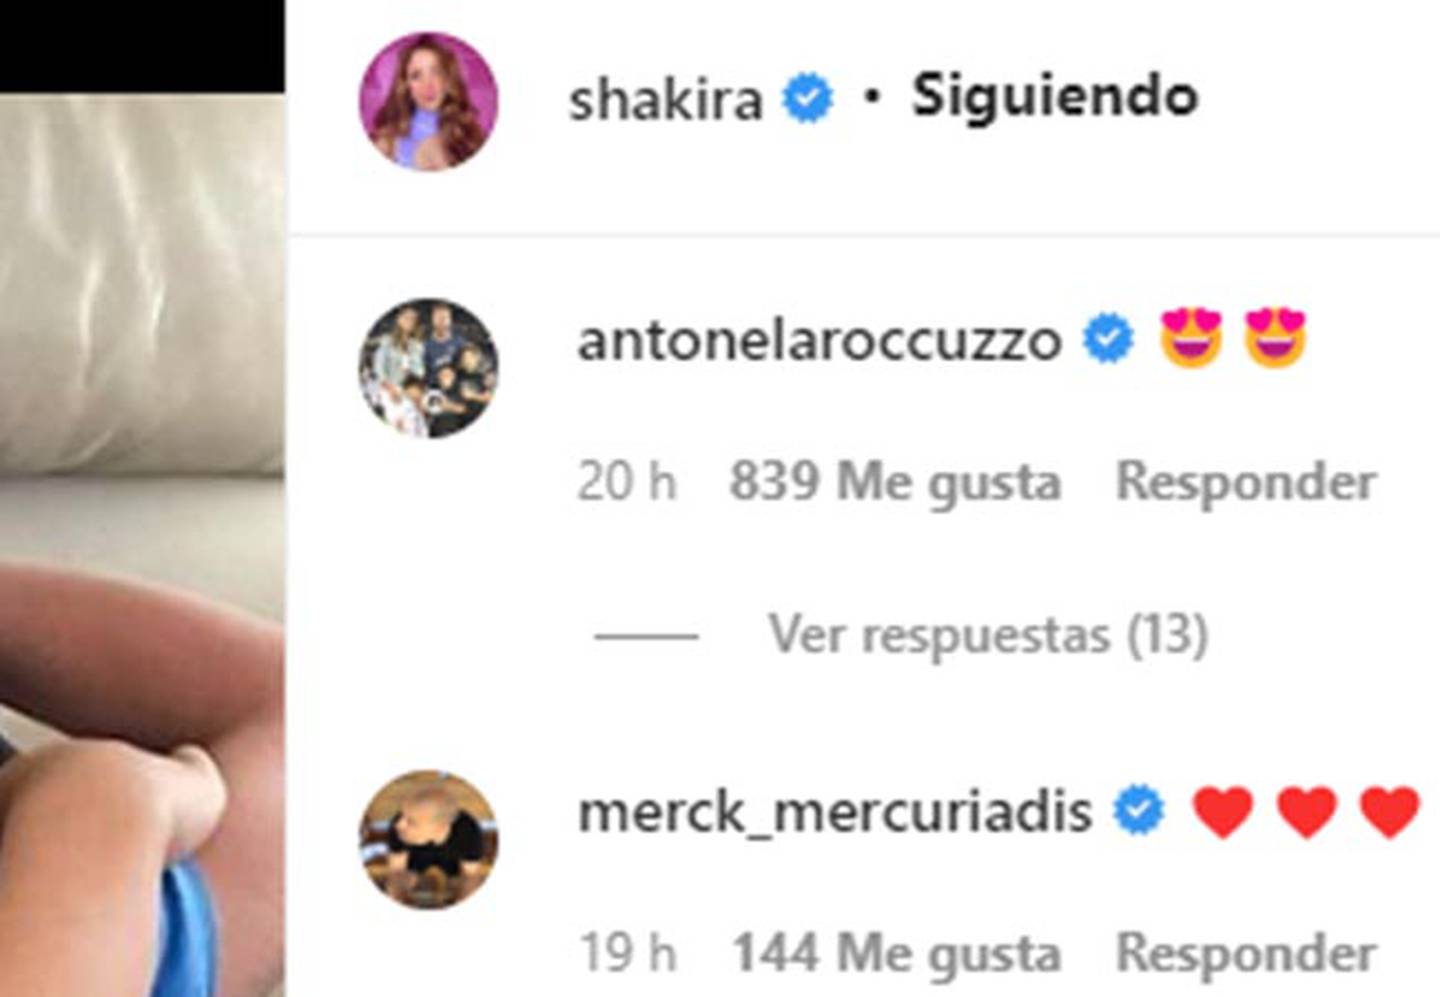 Antonella Rocuzzo set an example by showing her support for Shakira